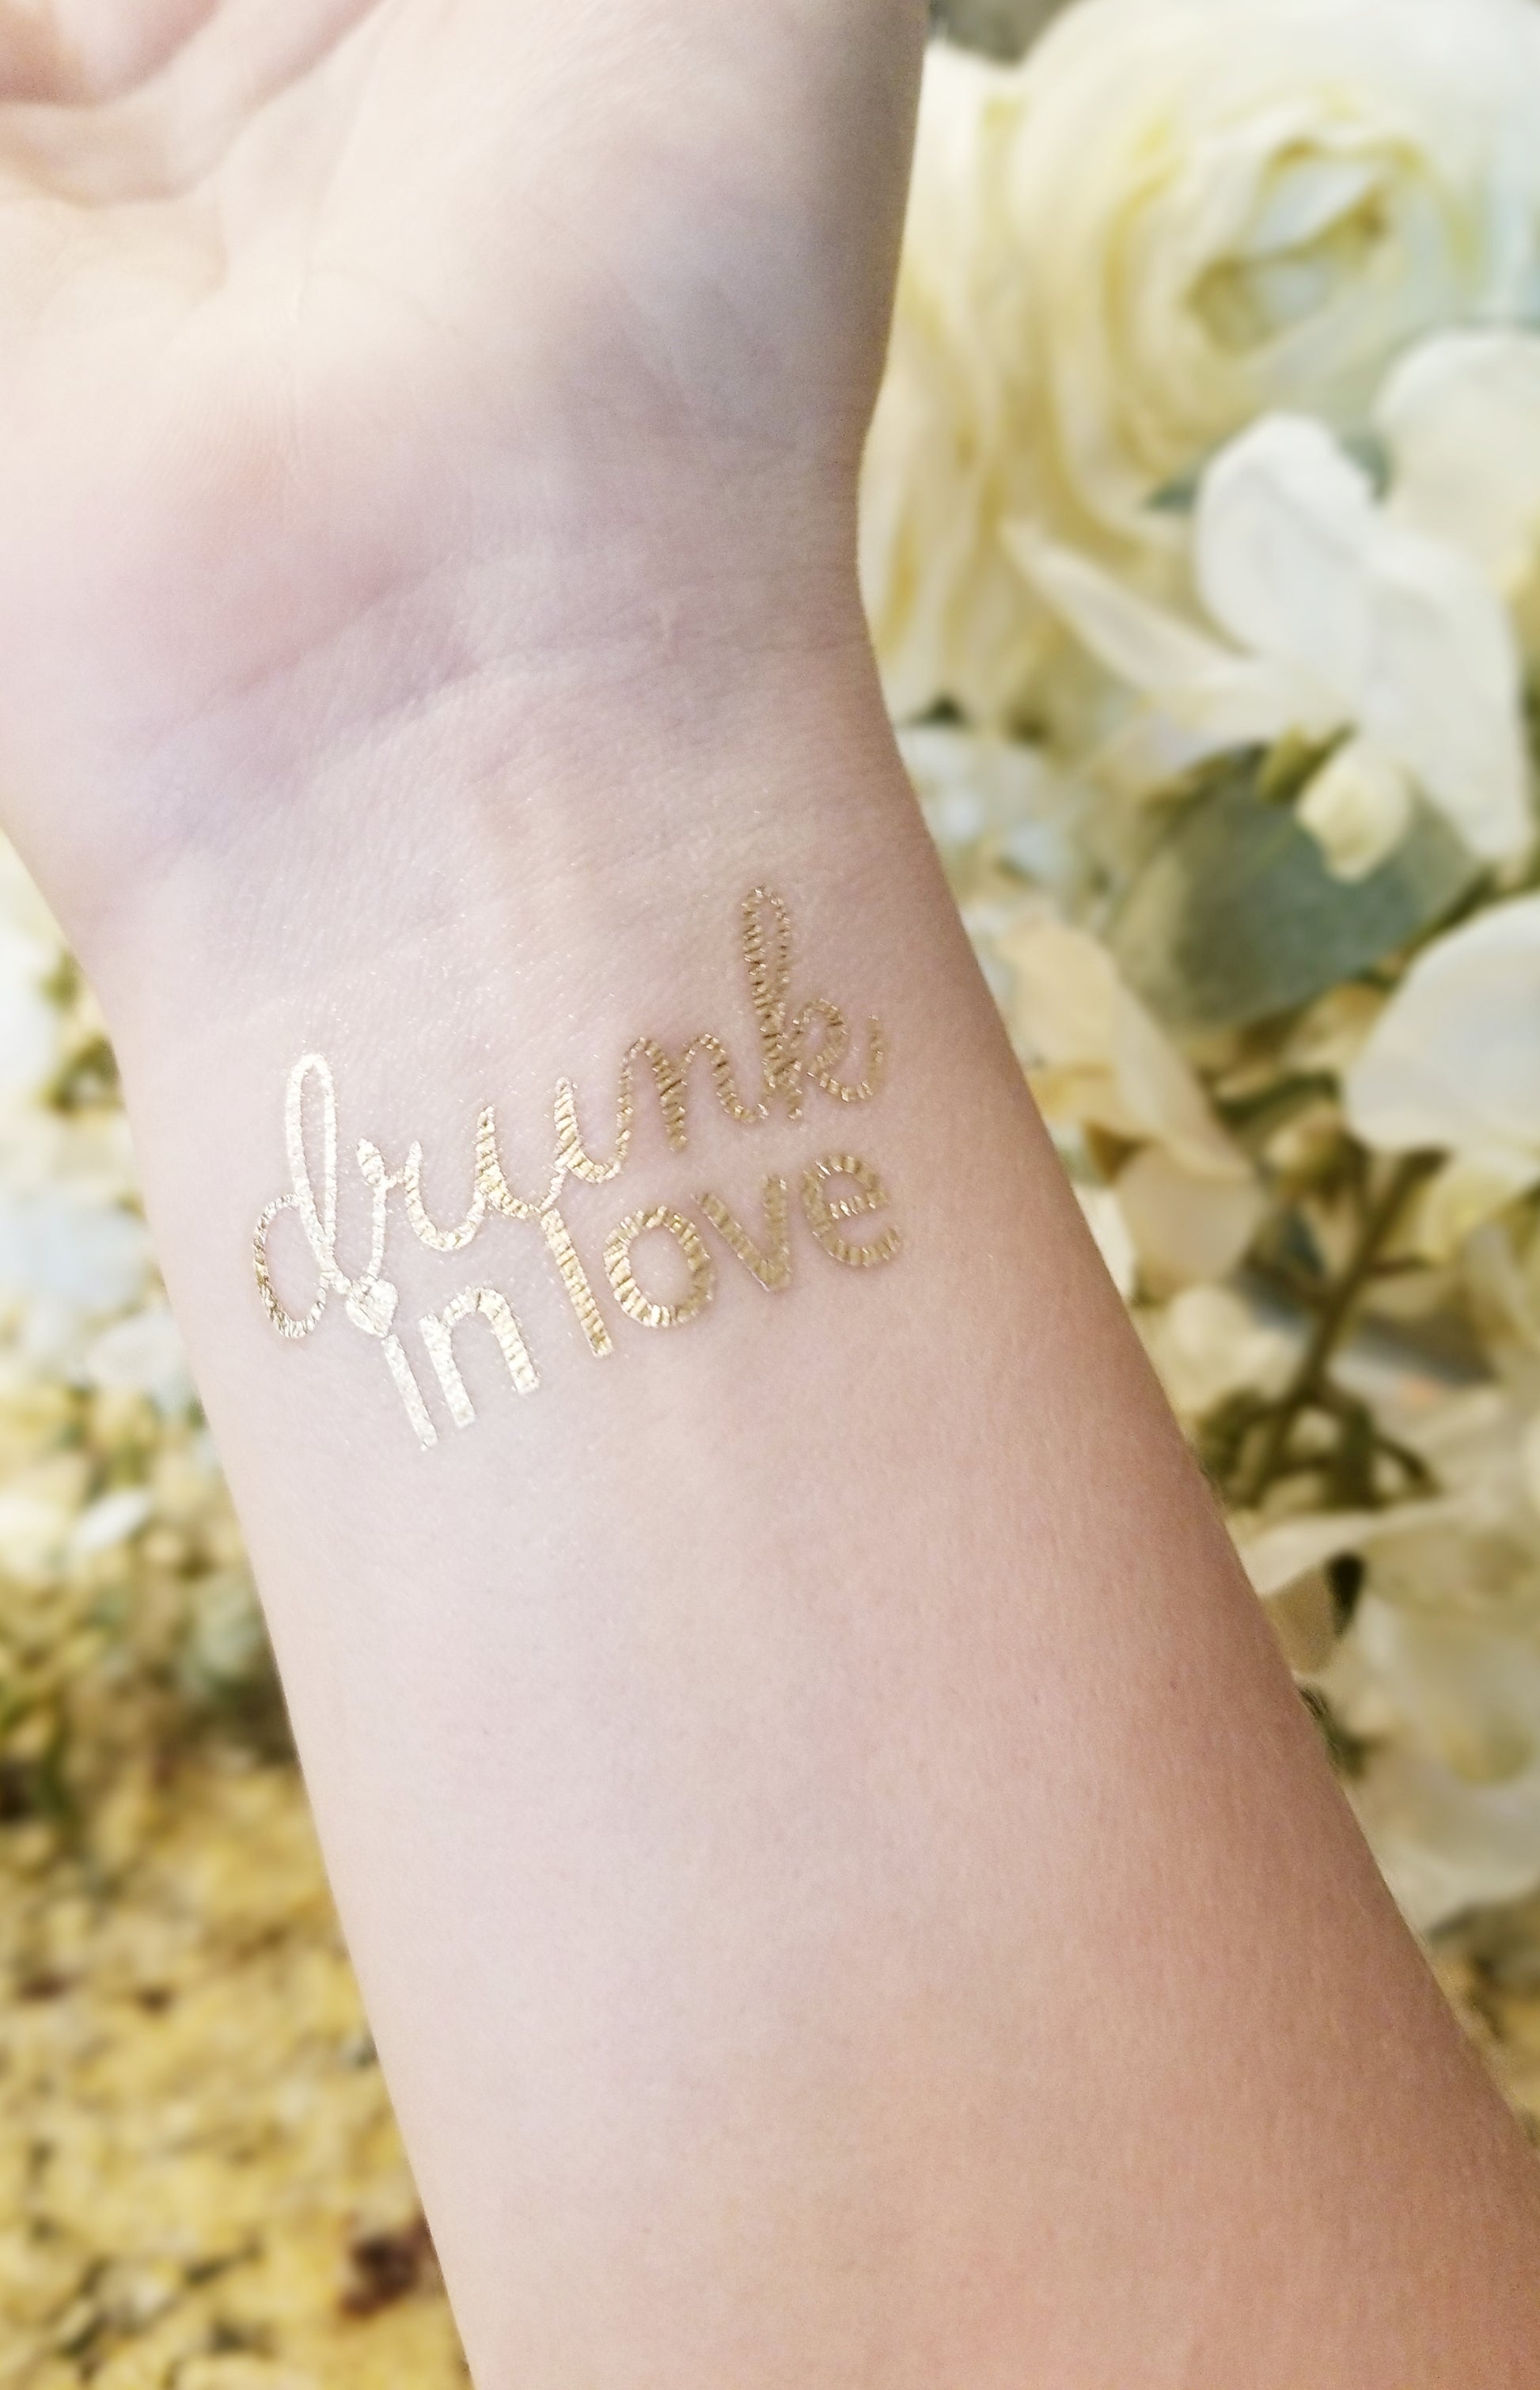 Drunk In Love Bachelorette Party Tattoos